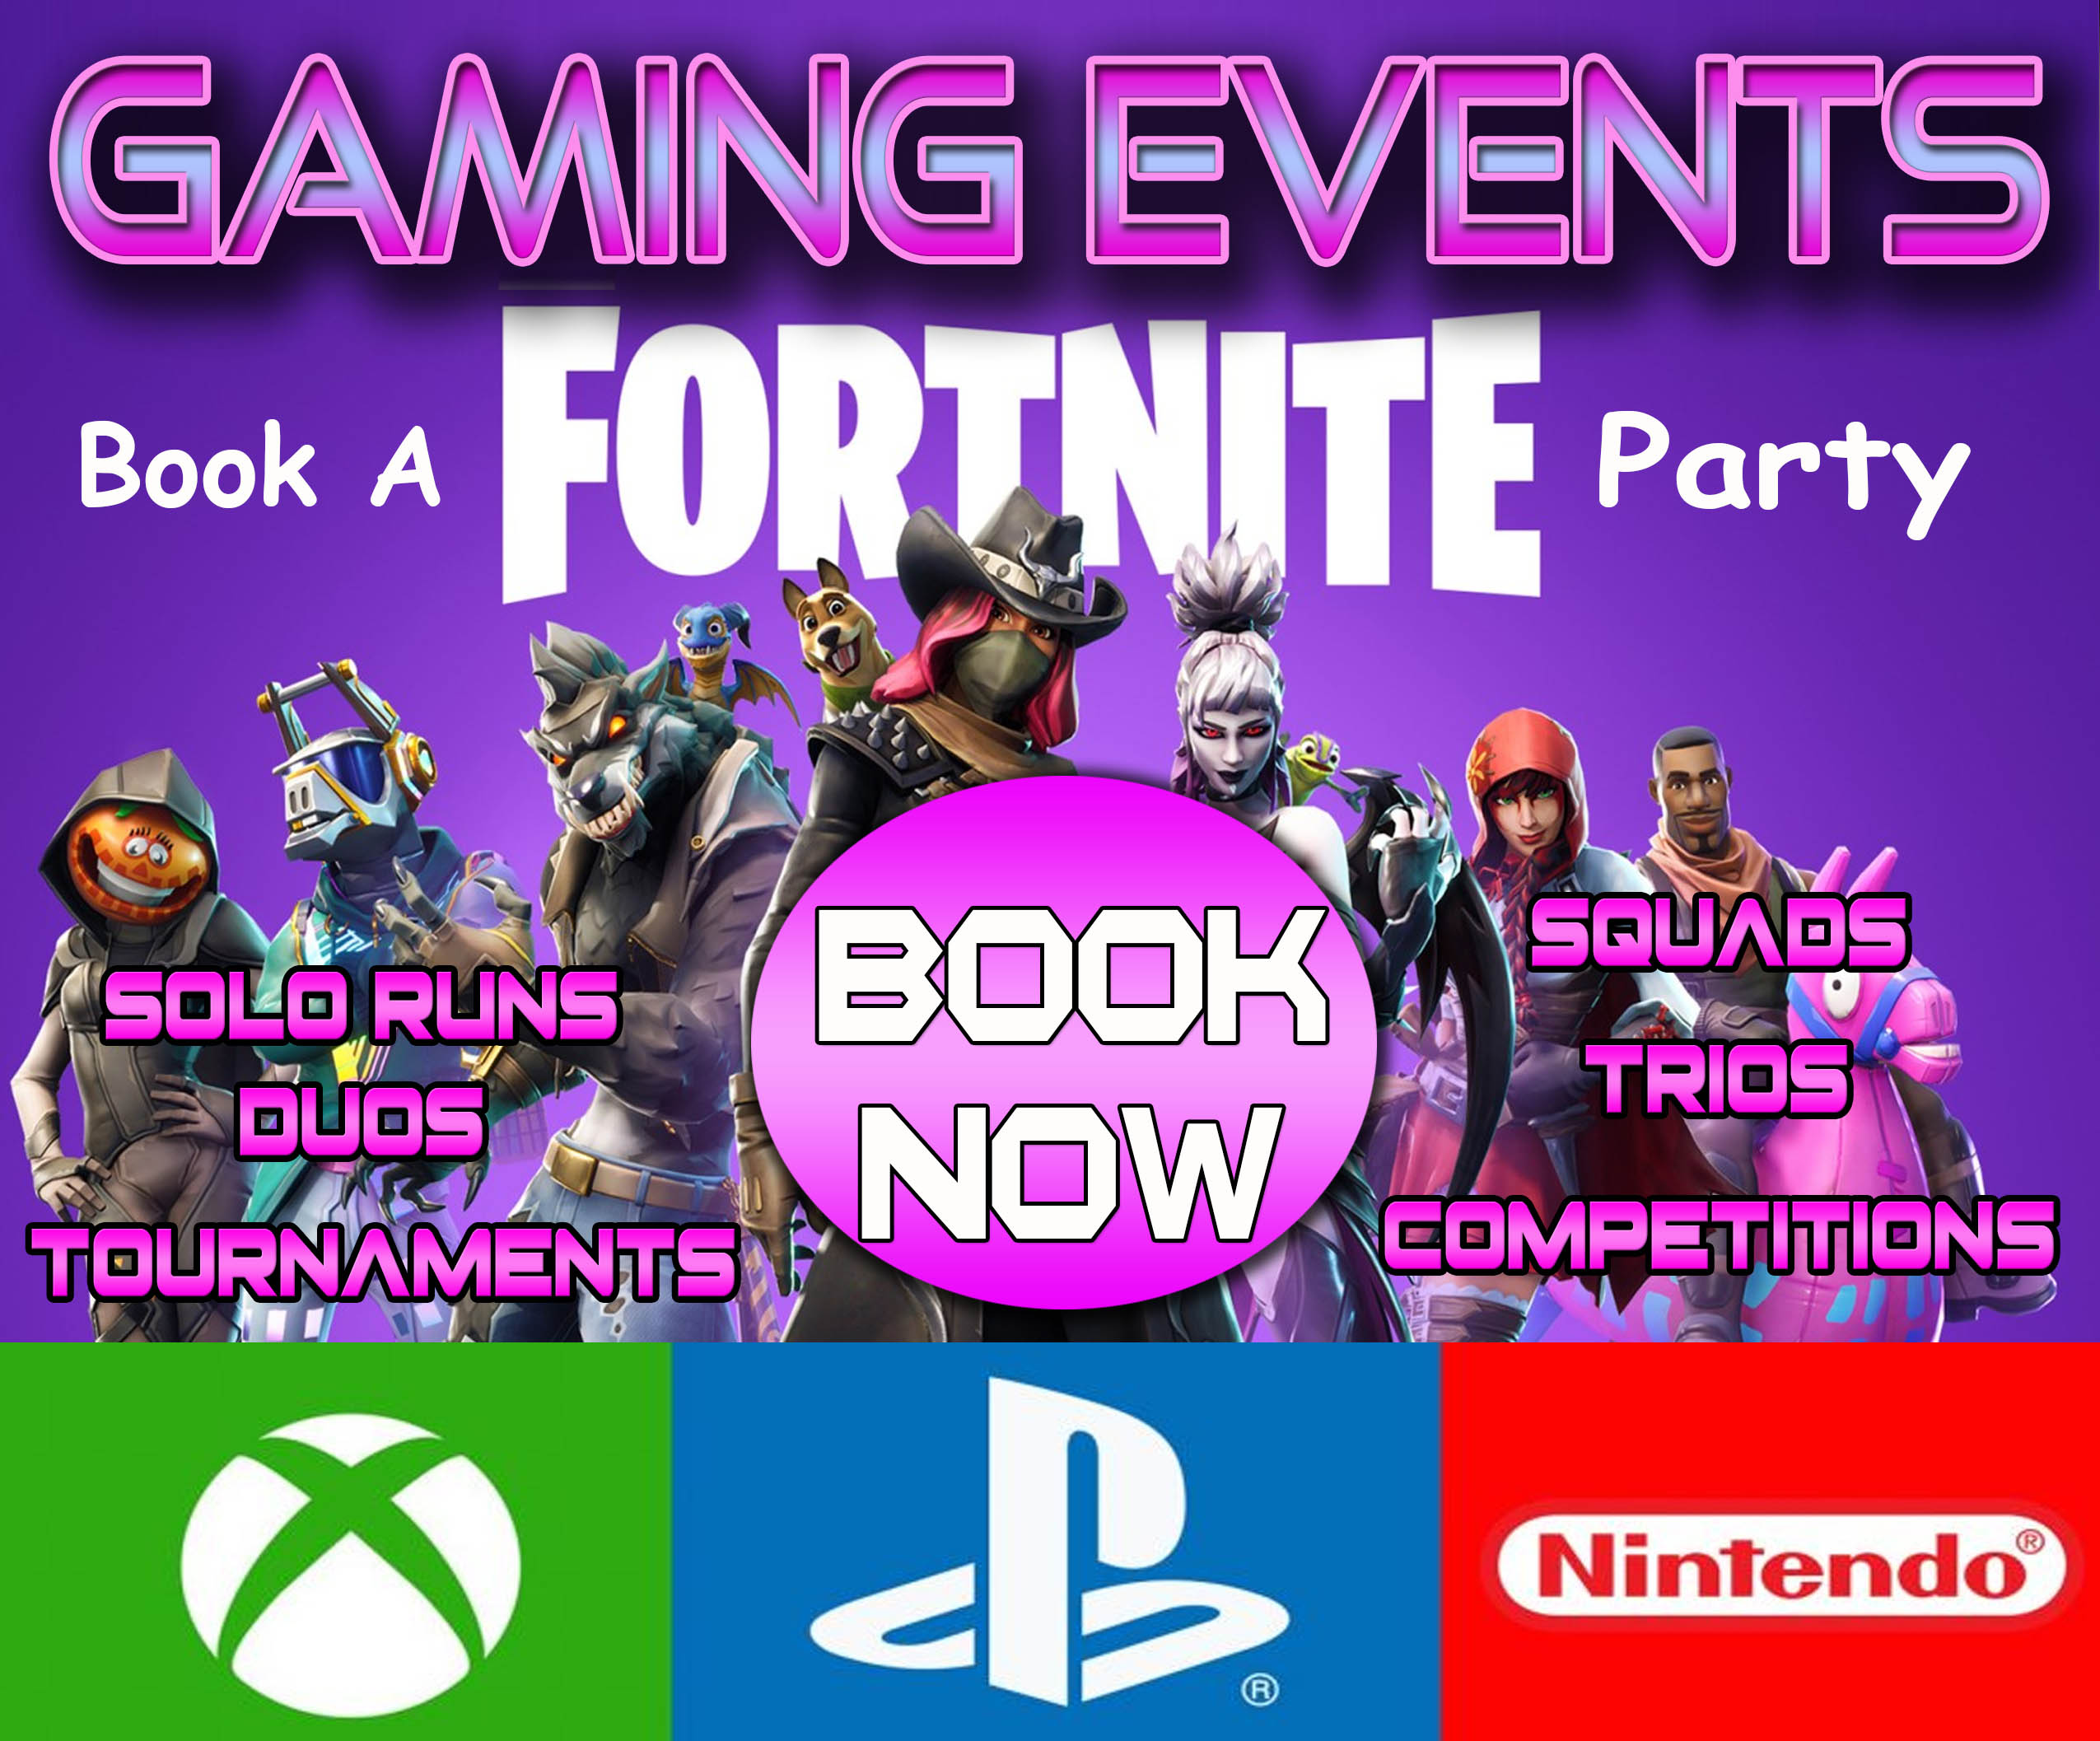 FORTNITE PARTIES – BOOK NOW!